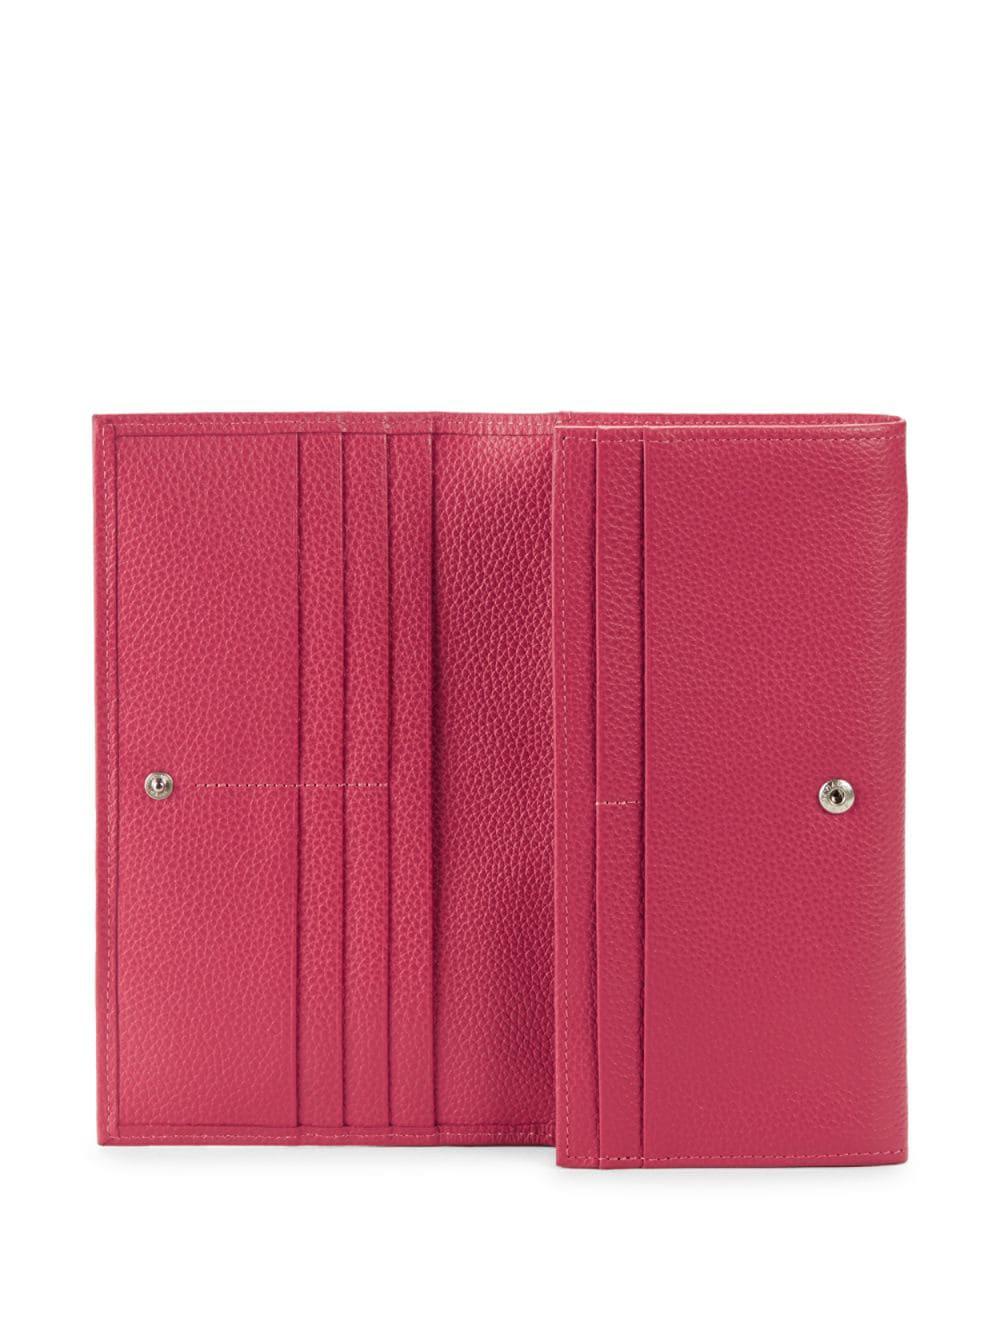 Longchamp Leather Veau Foulonne Checkbook Wallet in Pink - Lyst